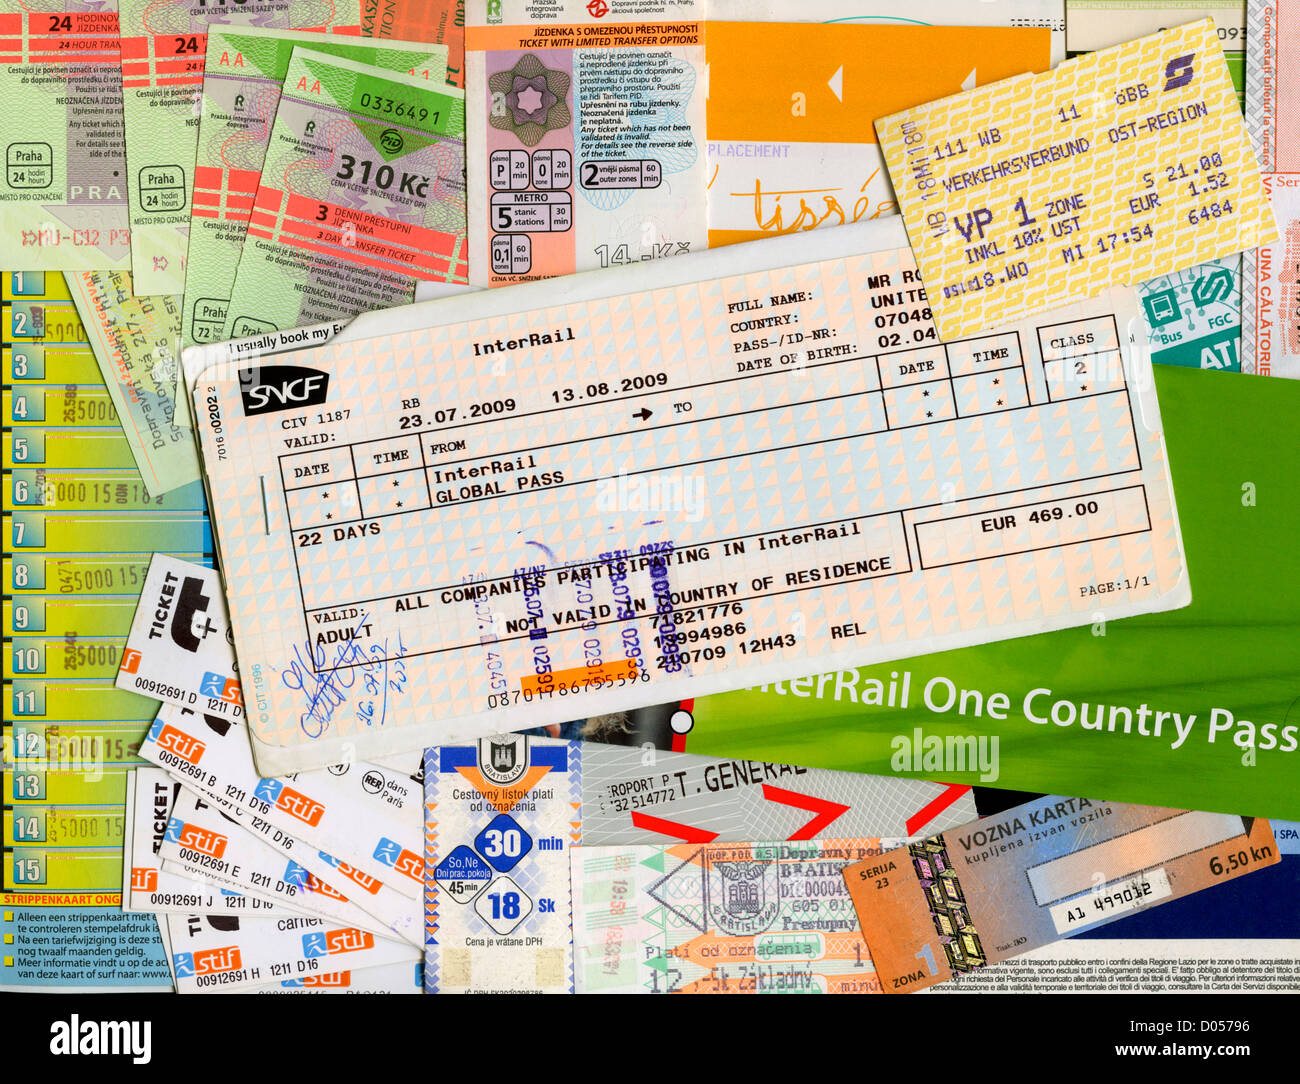 Interrail ticket with public transport tickets from around Europe Stock Photo